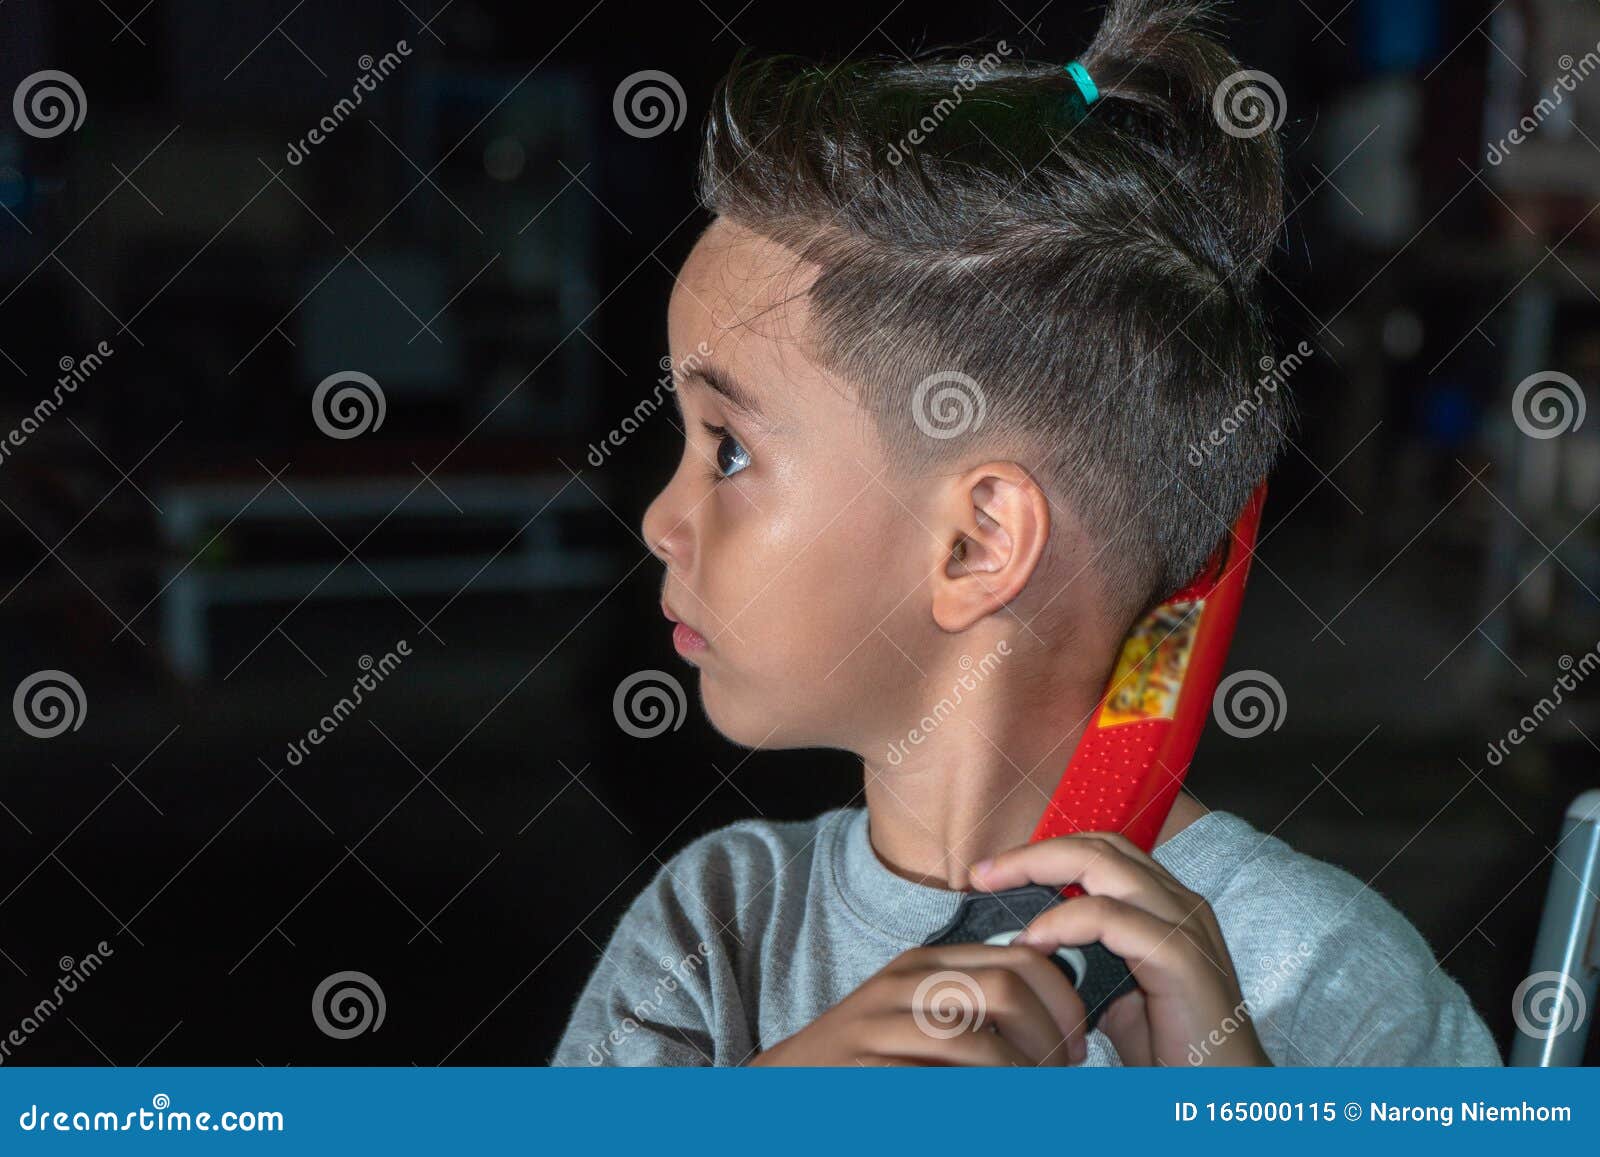 Guy Spiky Hair Stock Photos and Pictures - 583 Images | Shutterstock